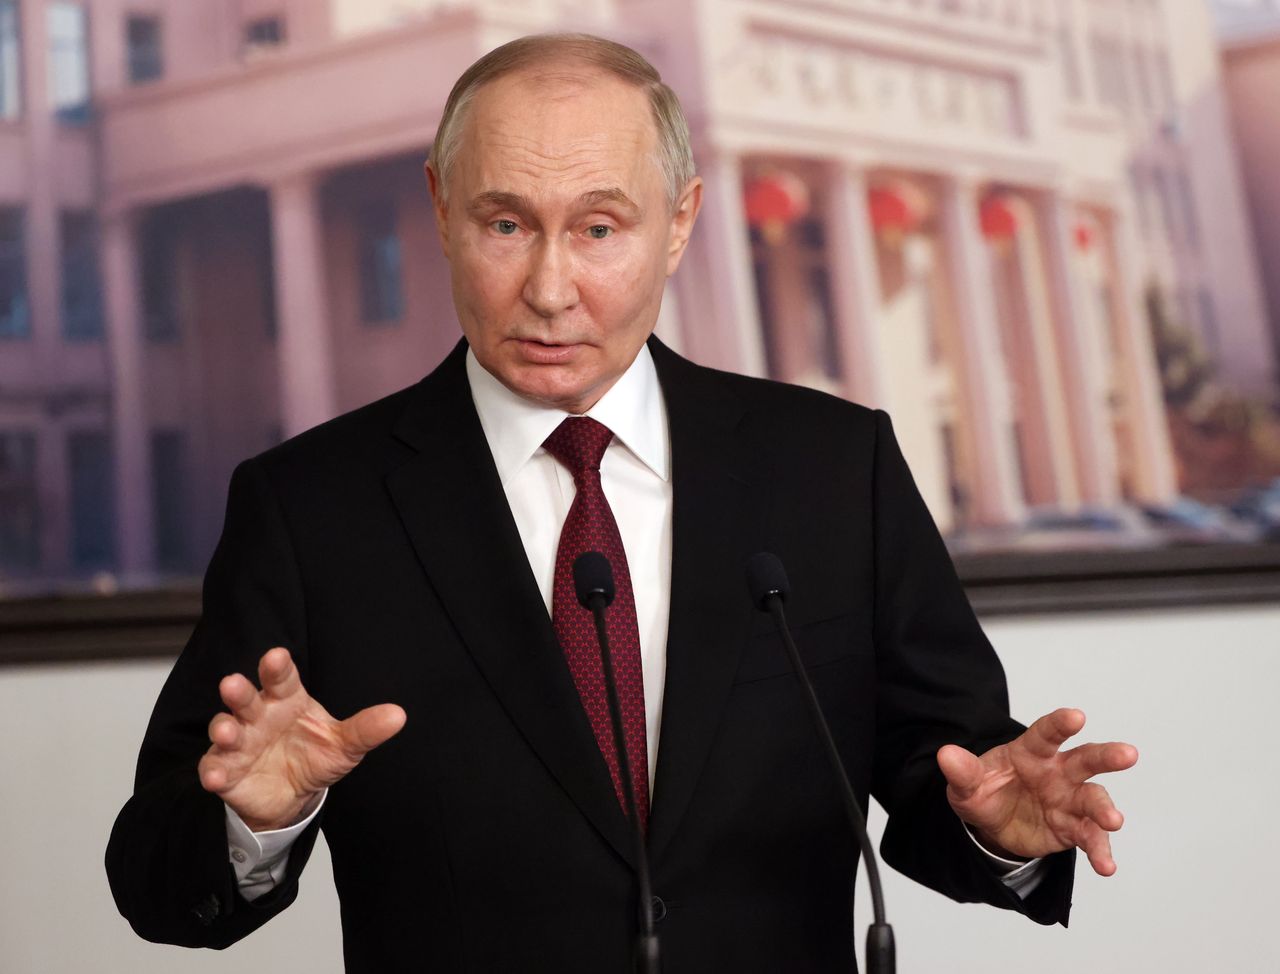 Putin threatens the West. "They are playing with fire."